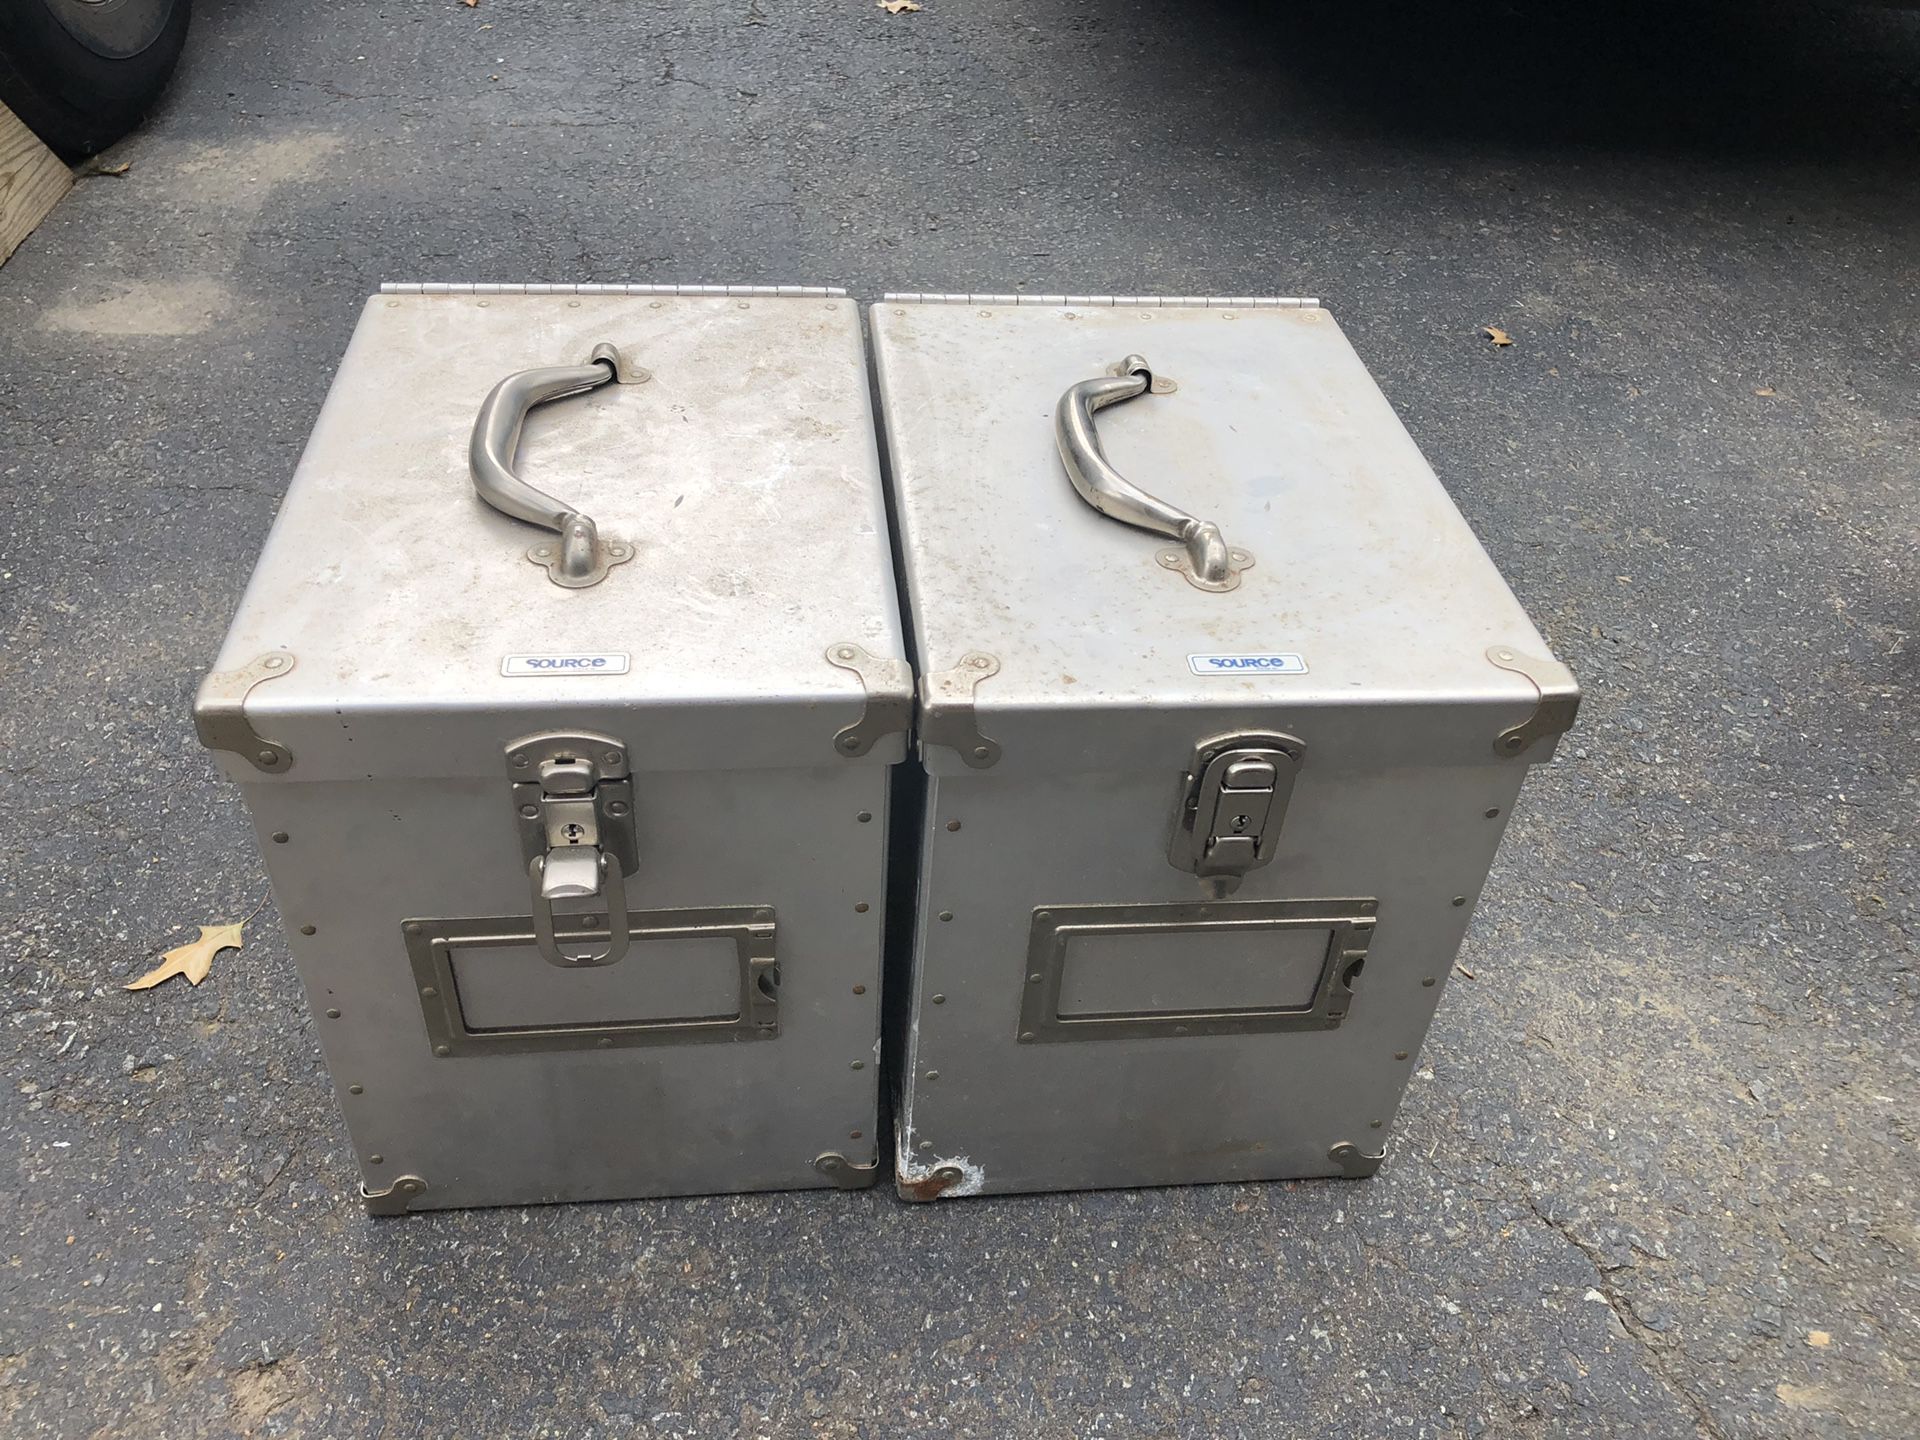 2 Tool boxes with 2 keys in each